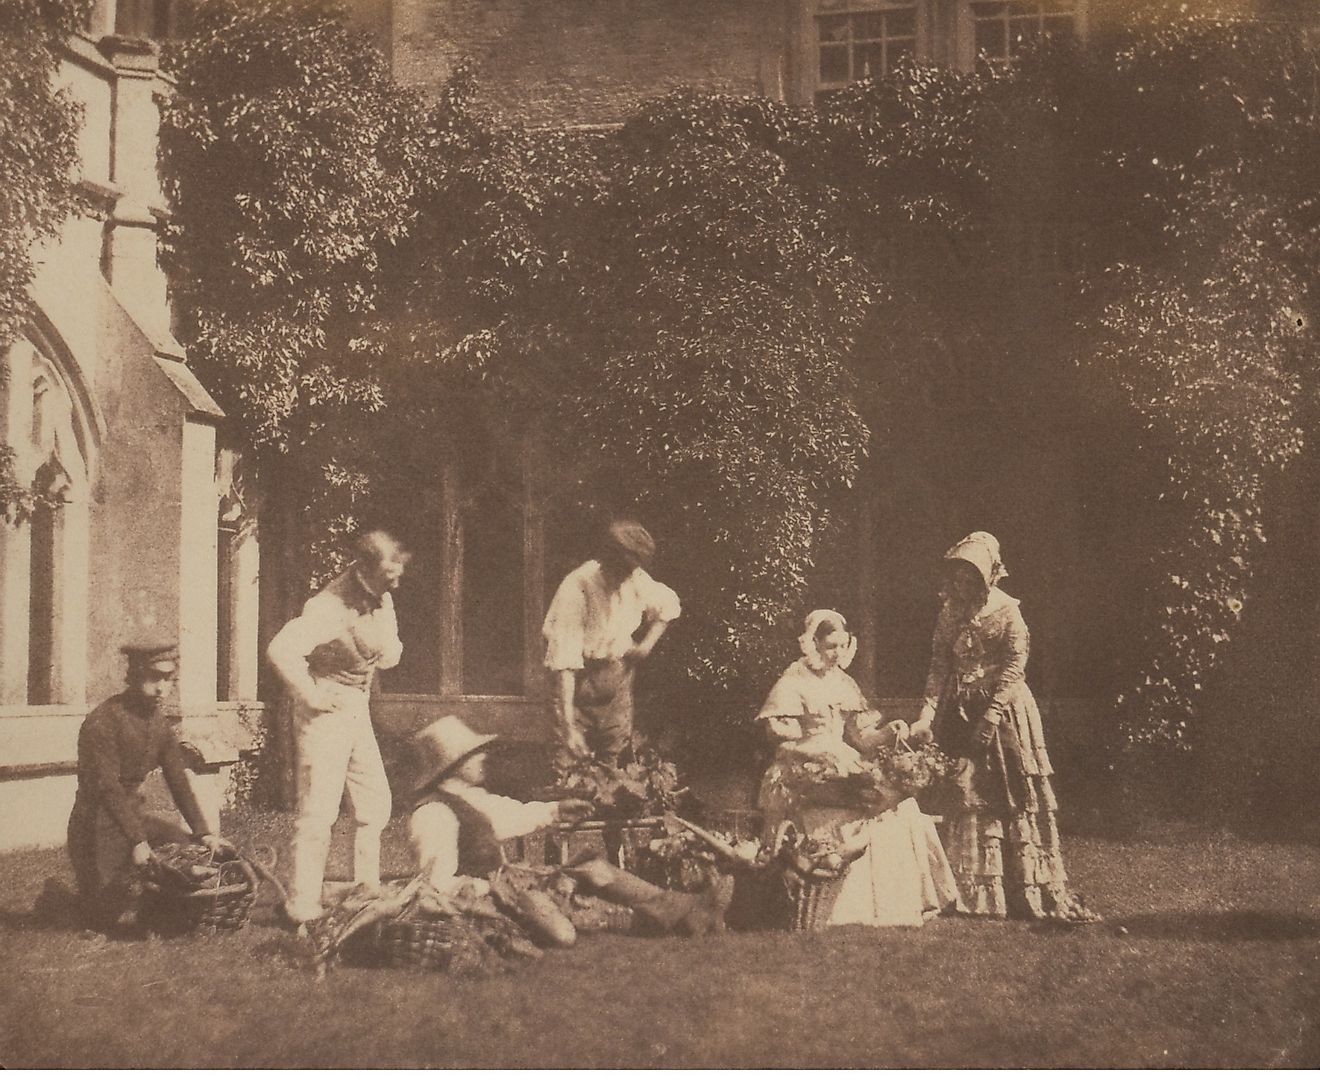 An 1844 photograph taken by William Henry Fox Talbot. 